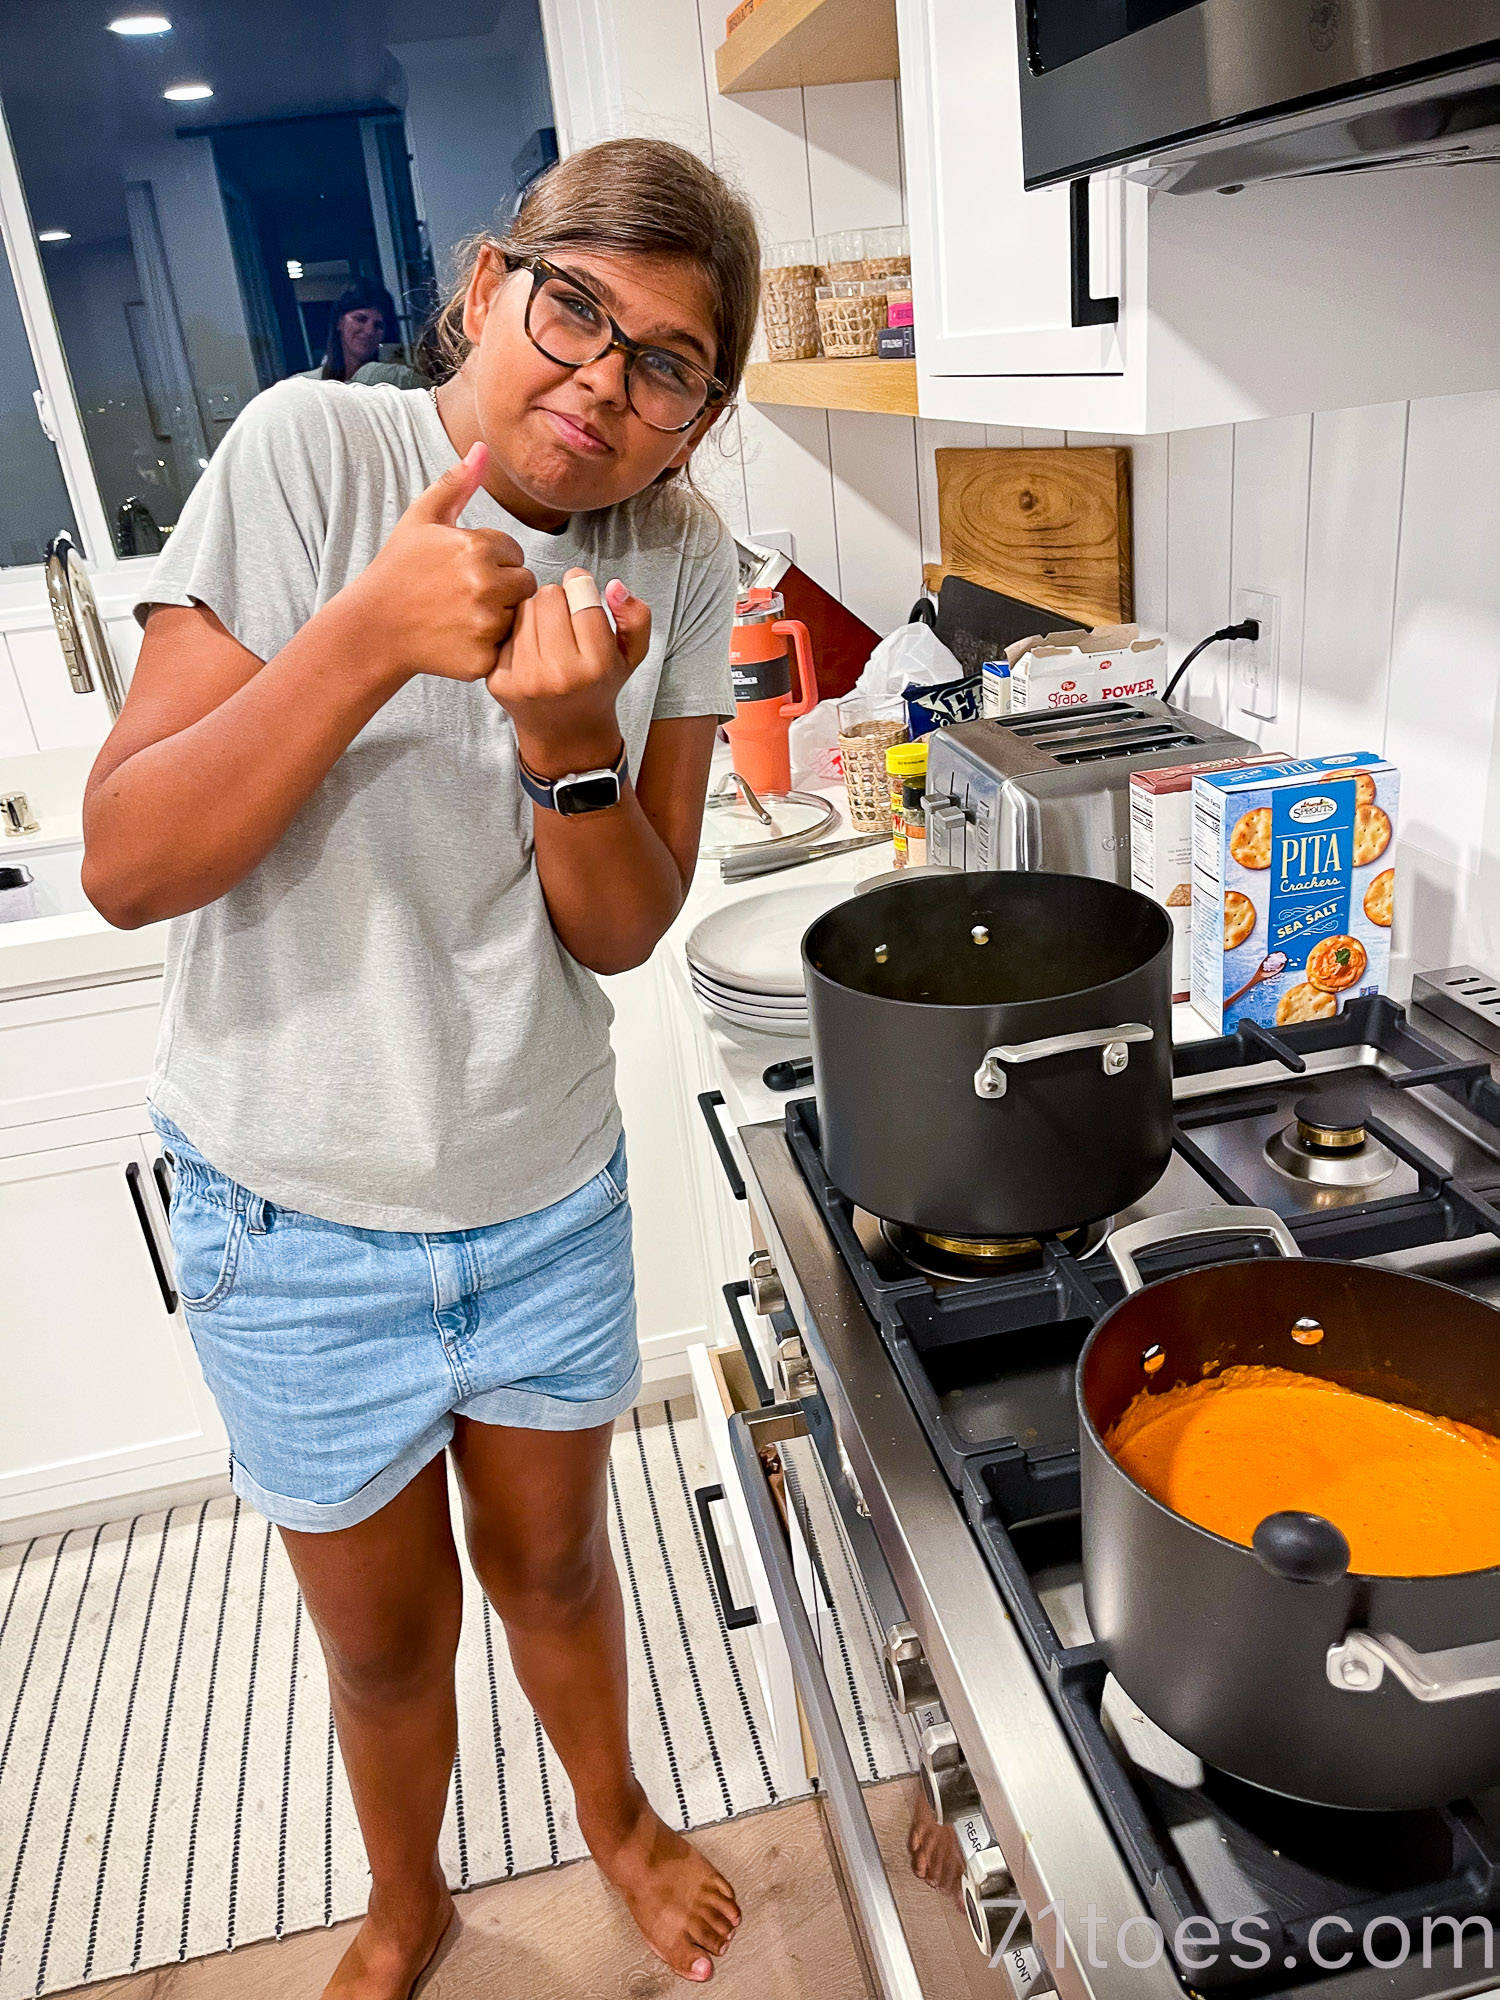 Lucy making pasta sauce for her summer goals